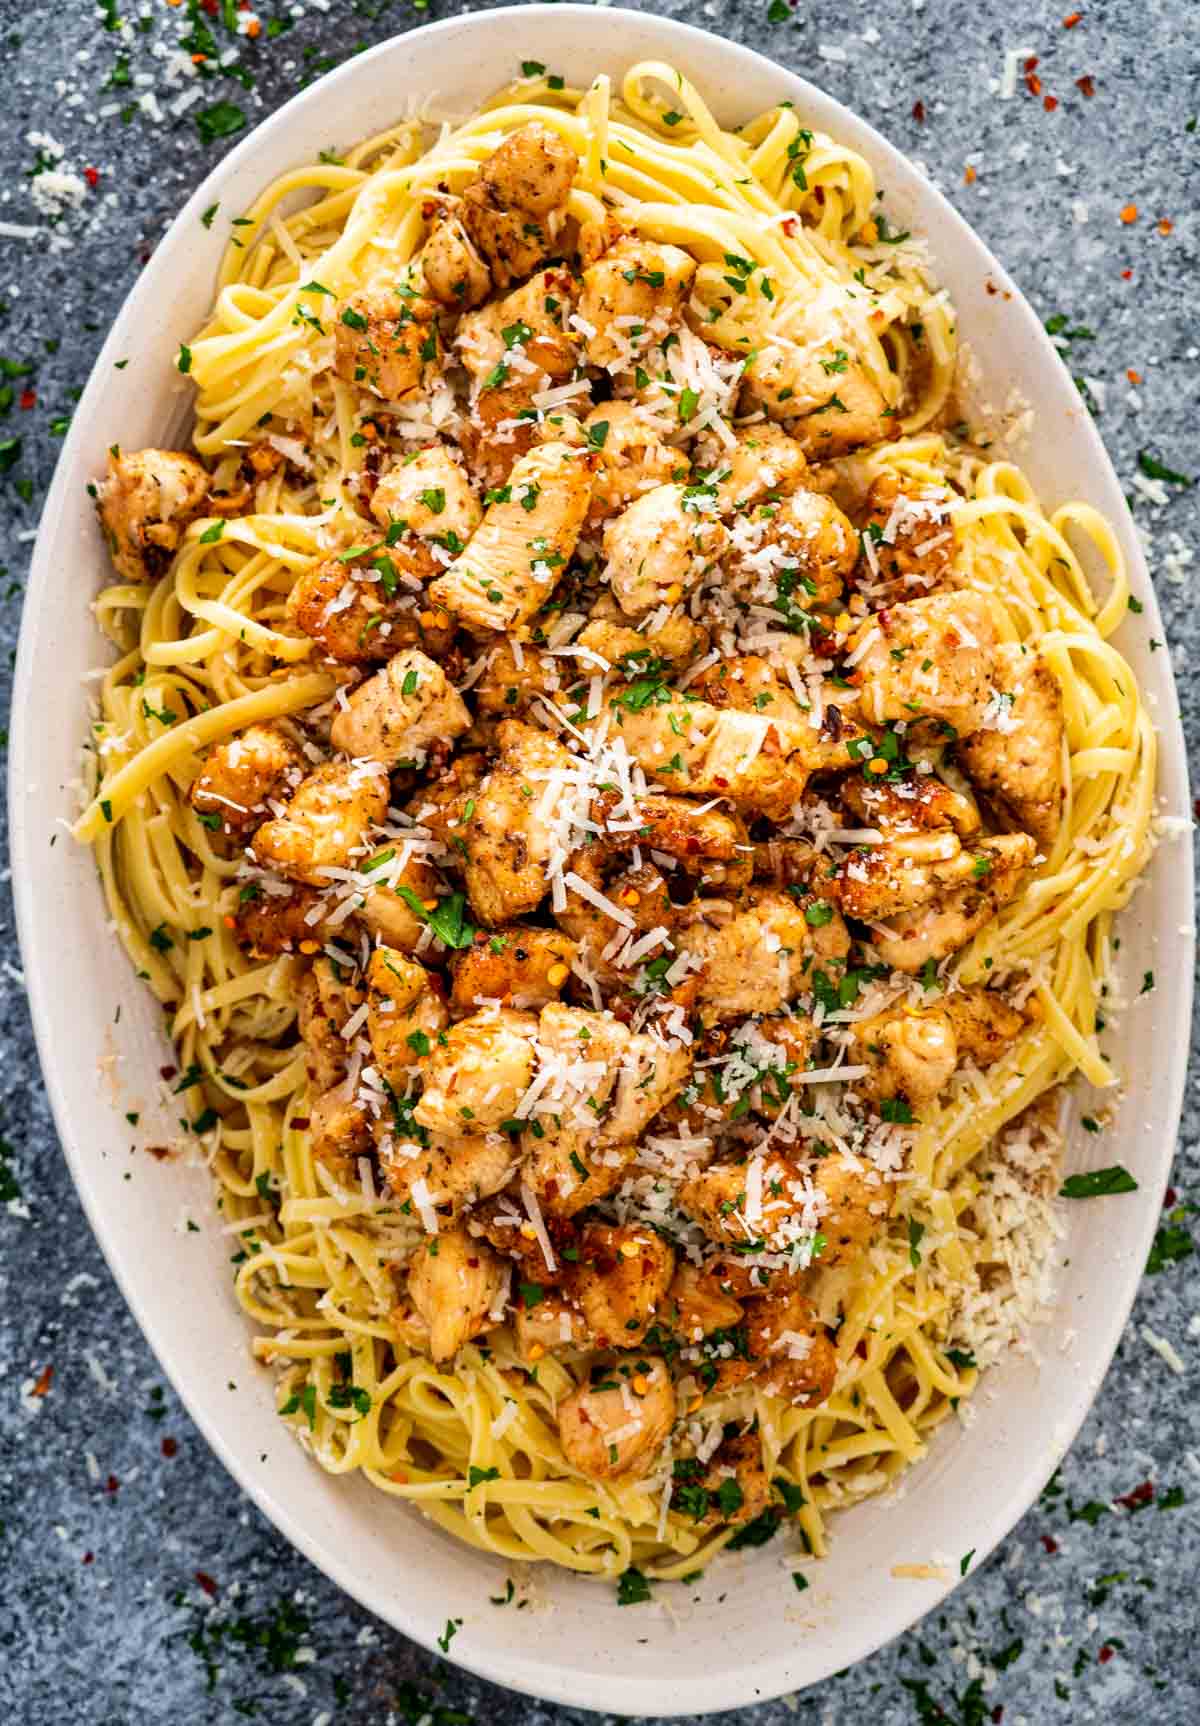 chicken scampi with linguini garnished with parmesan cheese on a white platter.